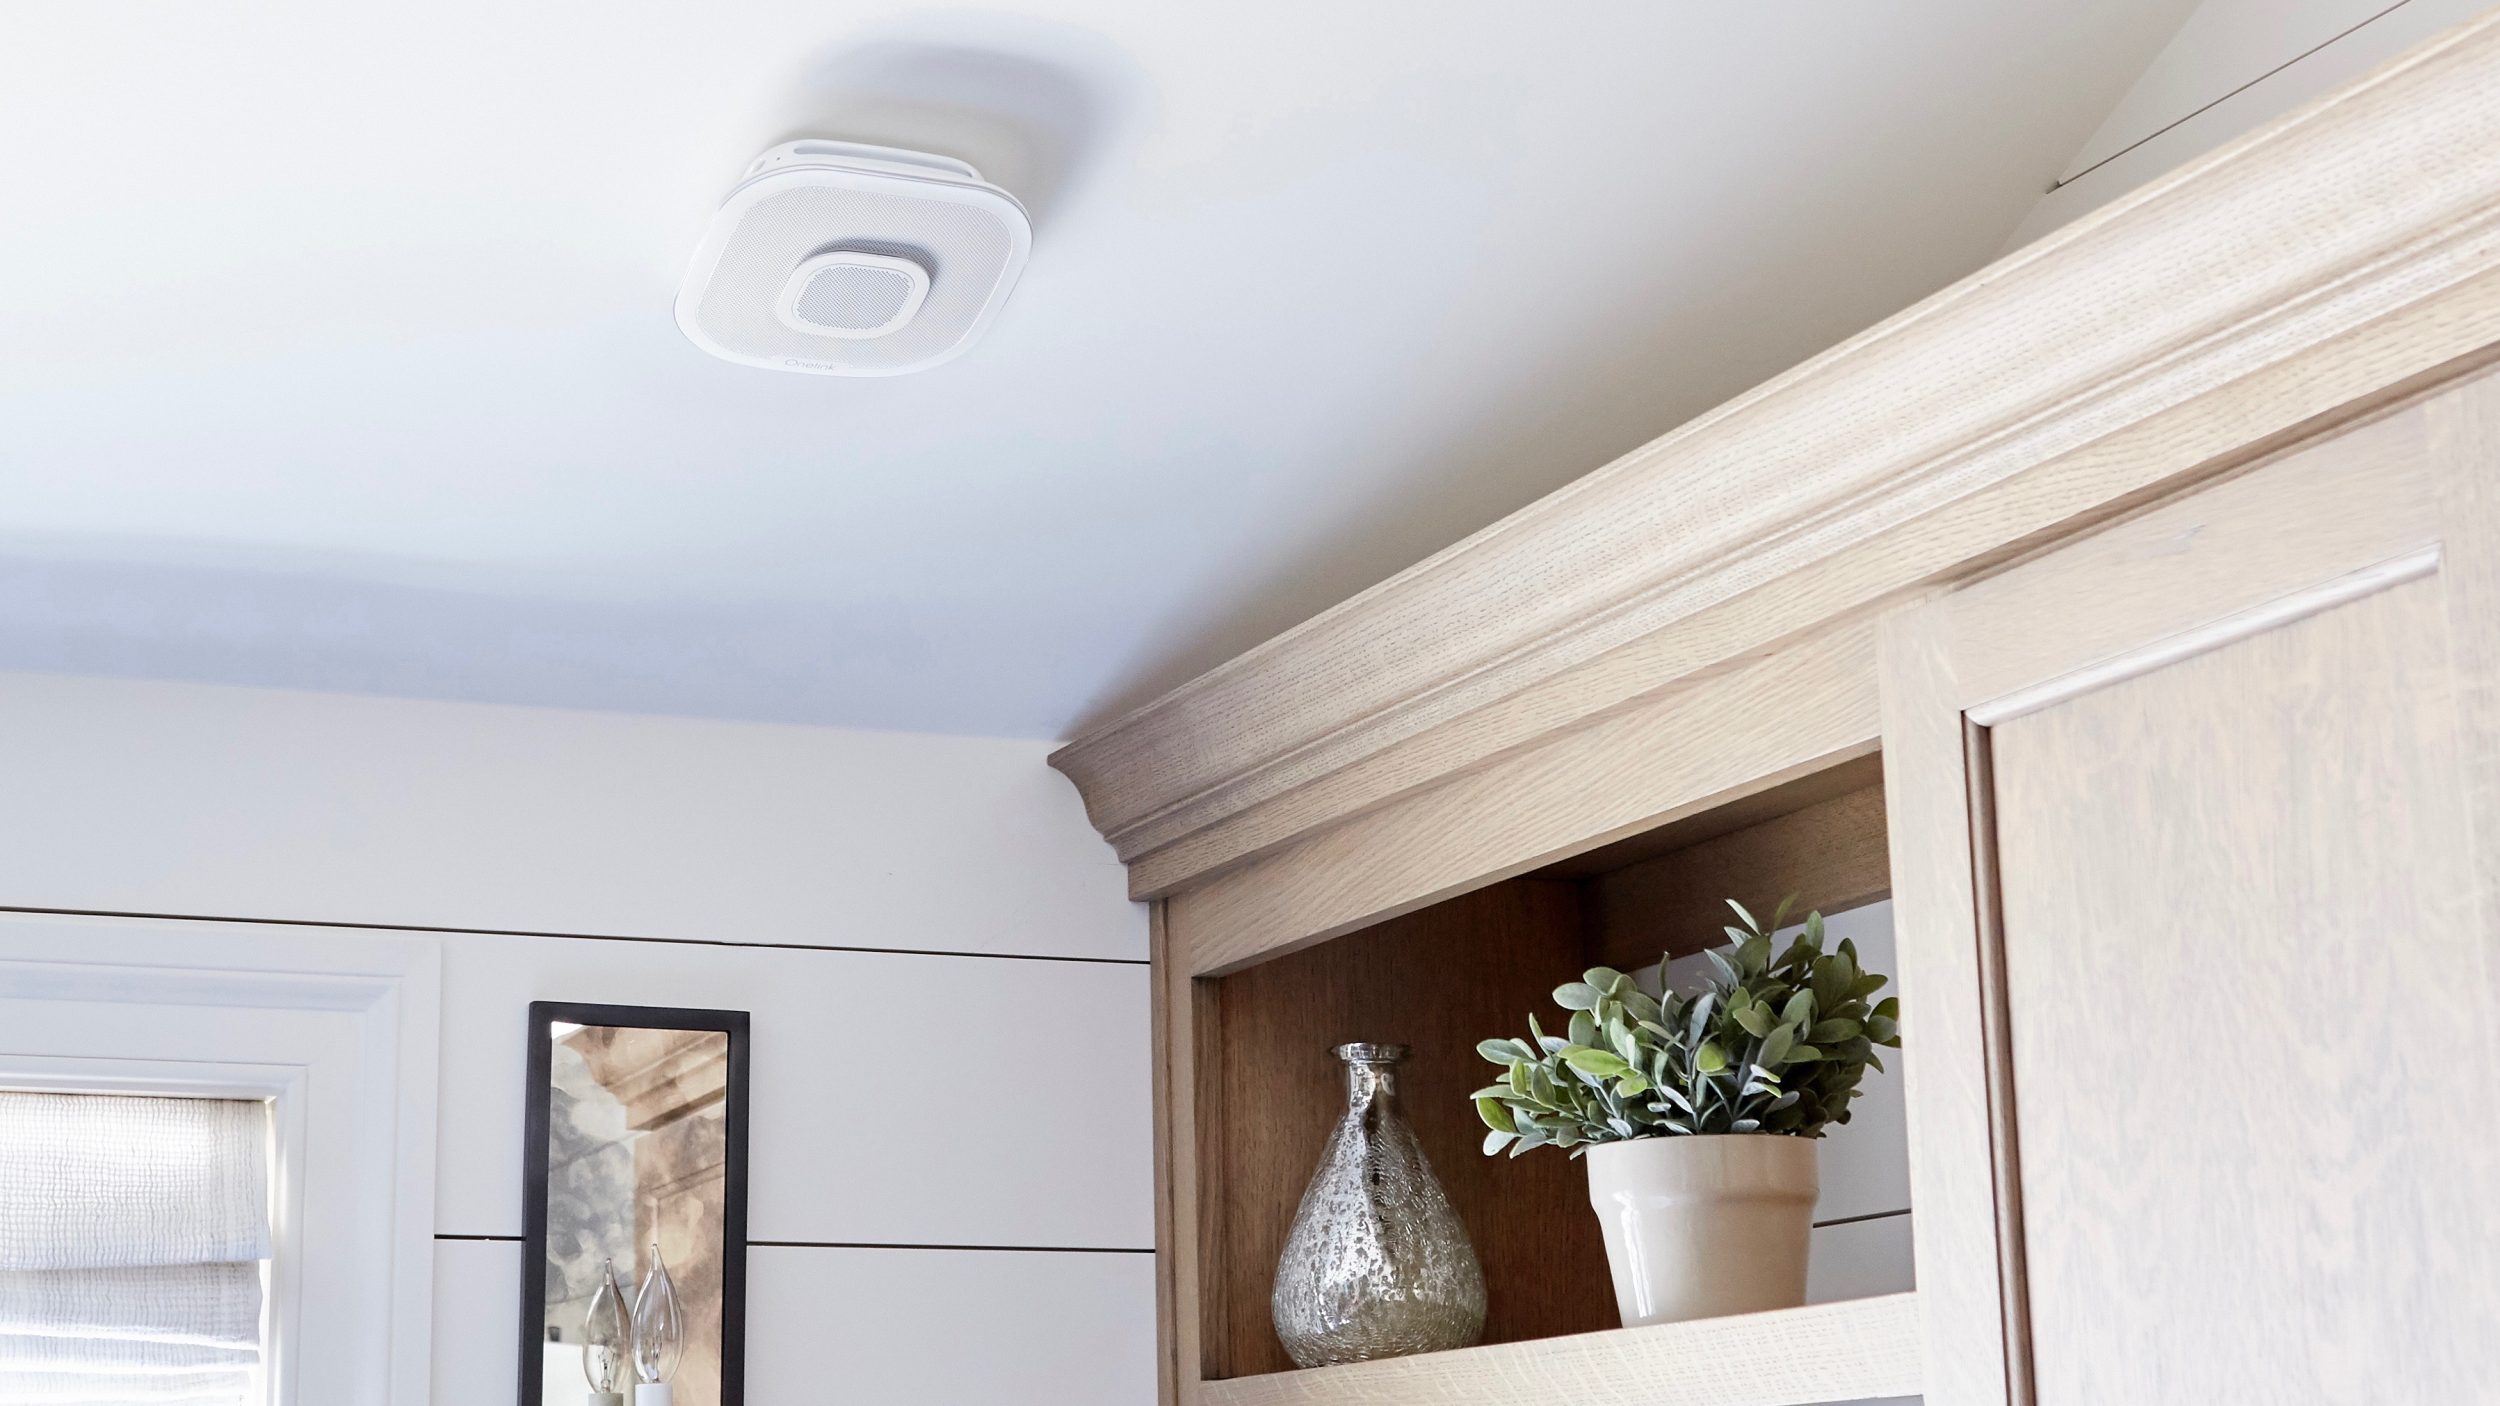 Apple Alert’s Safe & Sound HomeKit Smoke Alarm was the First to Hit the Market 